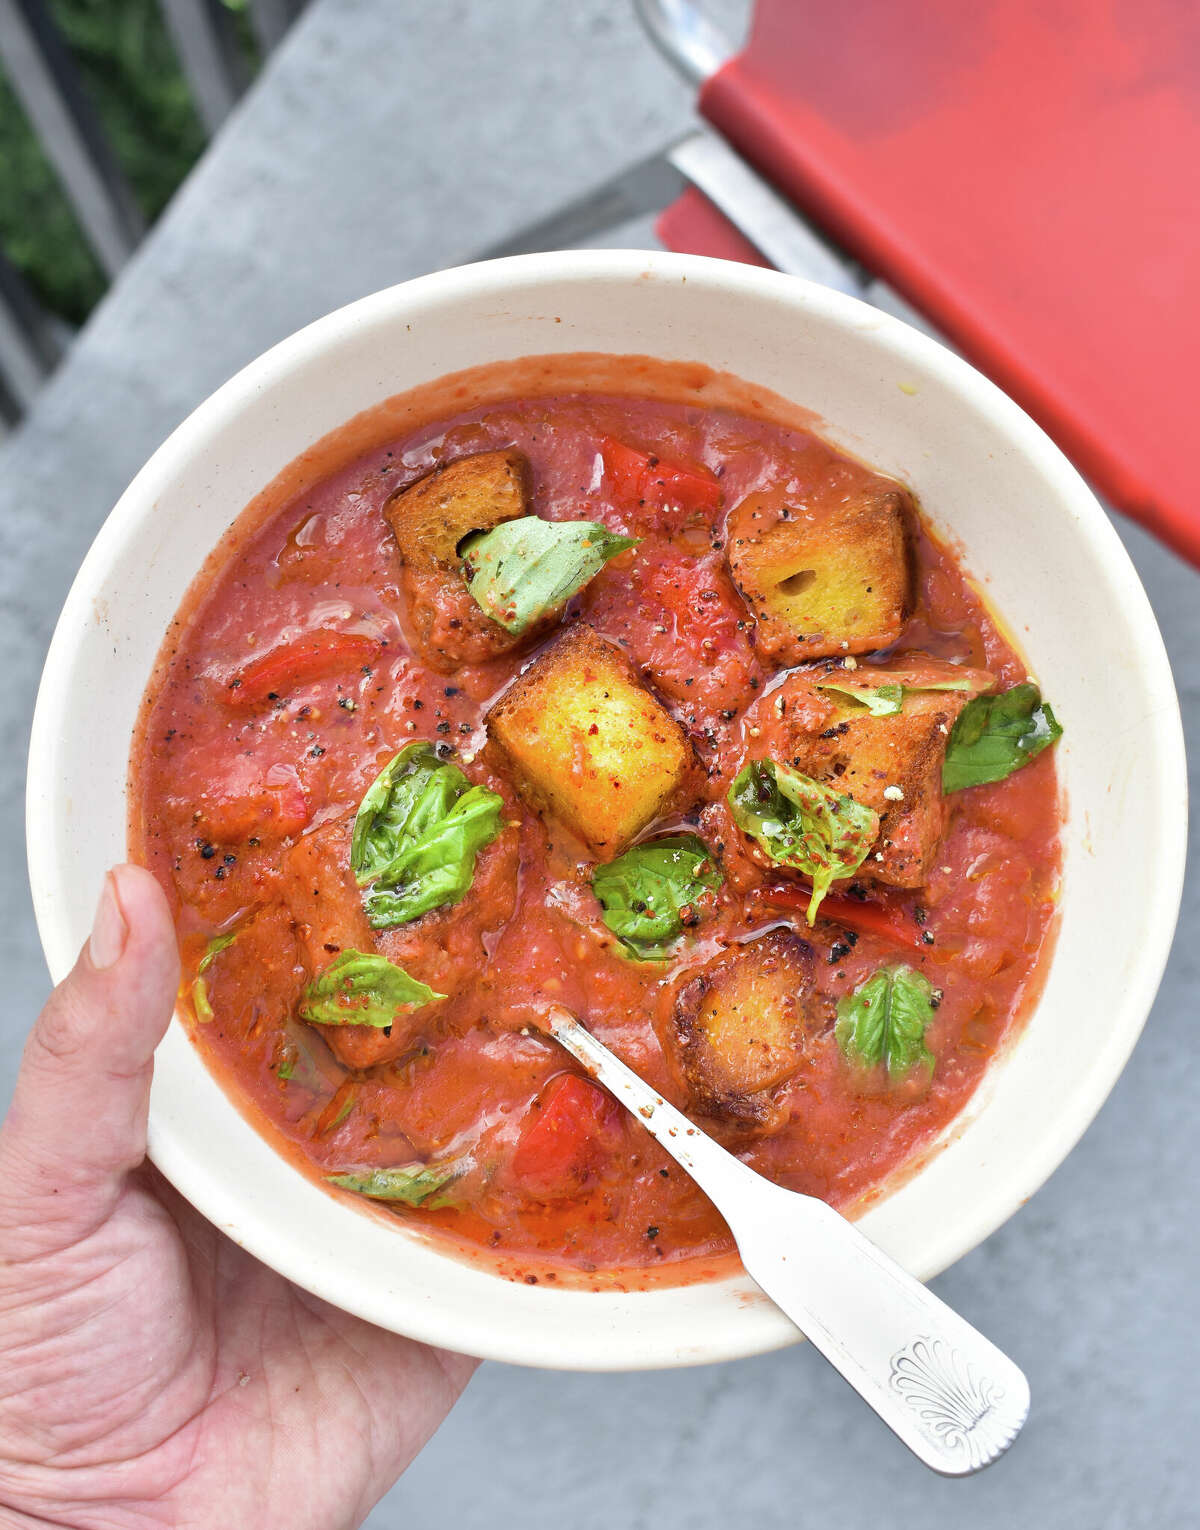 Lazy Early Girl Tomato Gazpacho with large croutons is a quick blend of Bay Area favorite summer tomatoes, cucumbers, and onions.